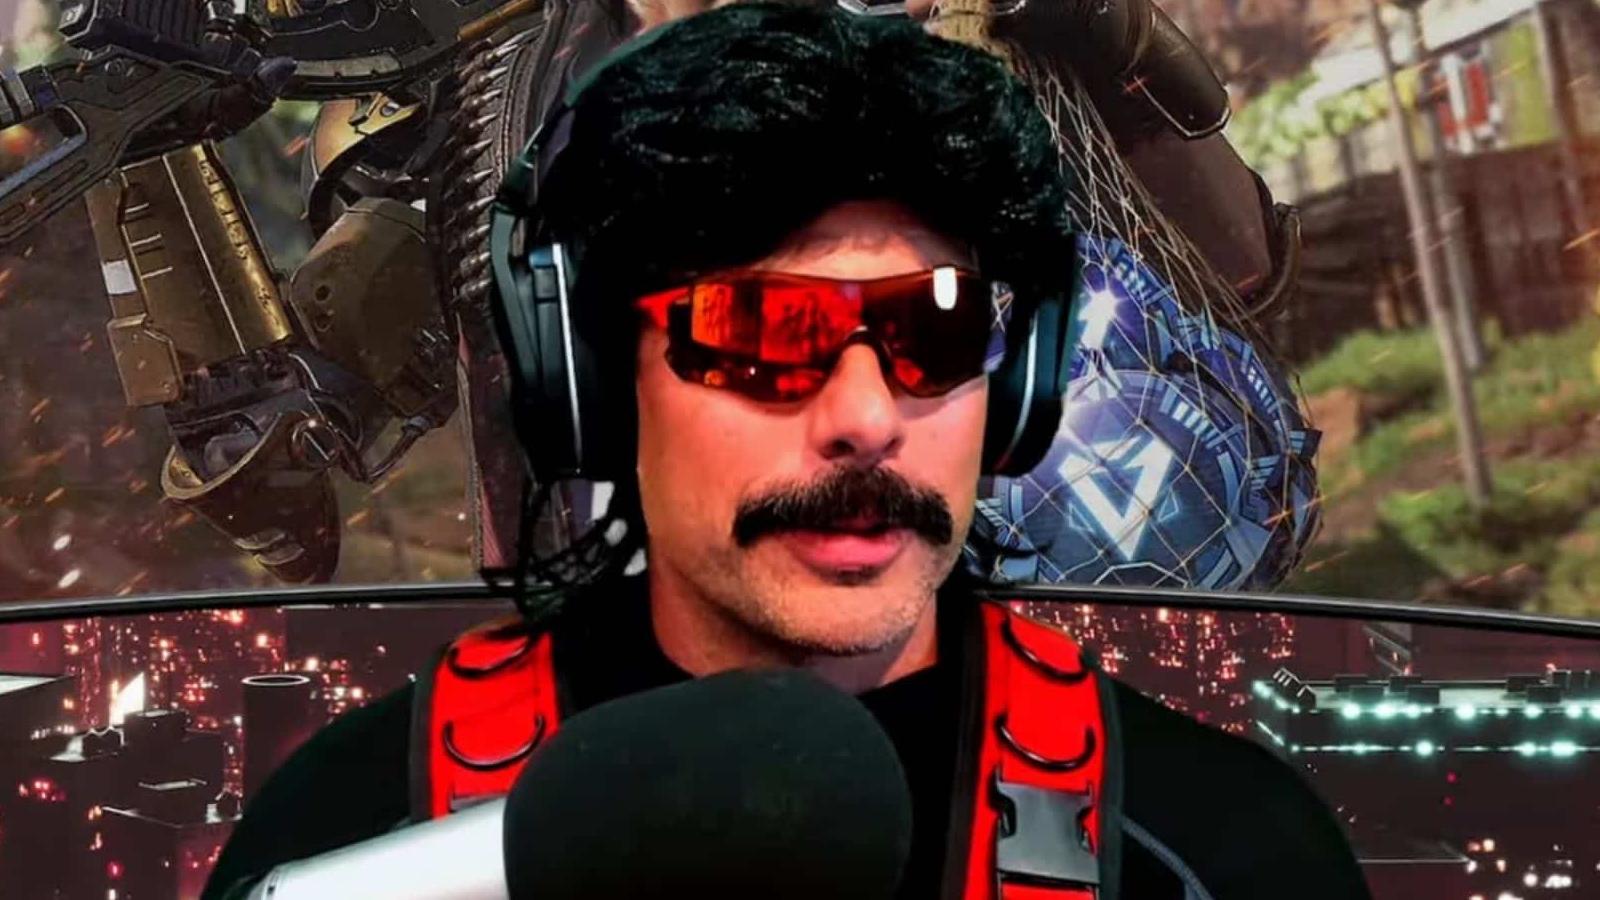 Dr Disrespect is an established FPS streamer and creator and that experience leads him to believe Apex Legends is the most difficult FPS on the market.